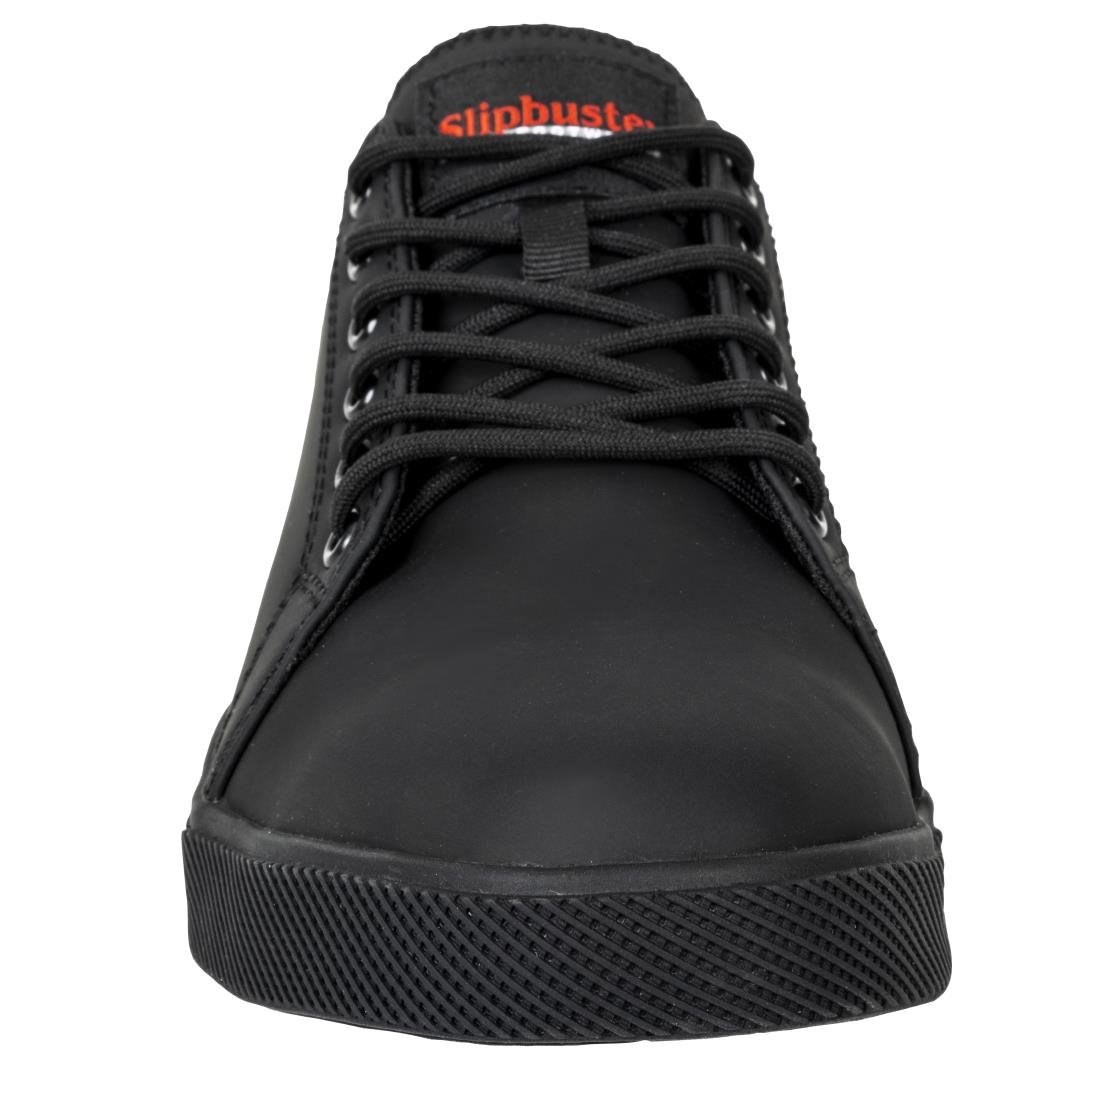 BA060-46 Slipbuster Recycled Microfibre Safety Trainers Matte Black 46 JD Catering Equipment Solutions Ltd